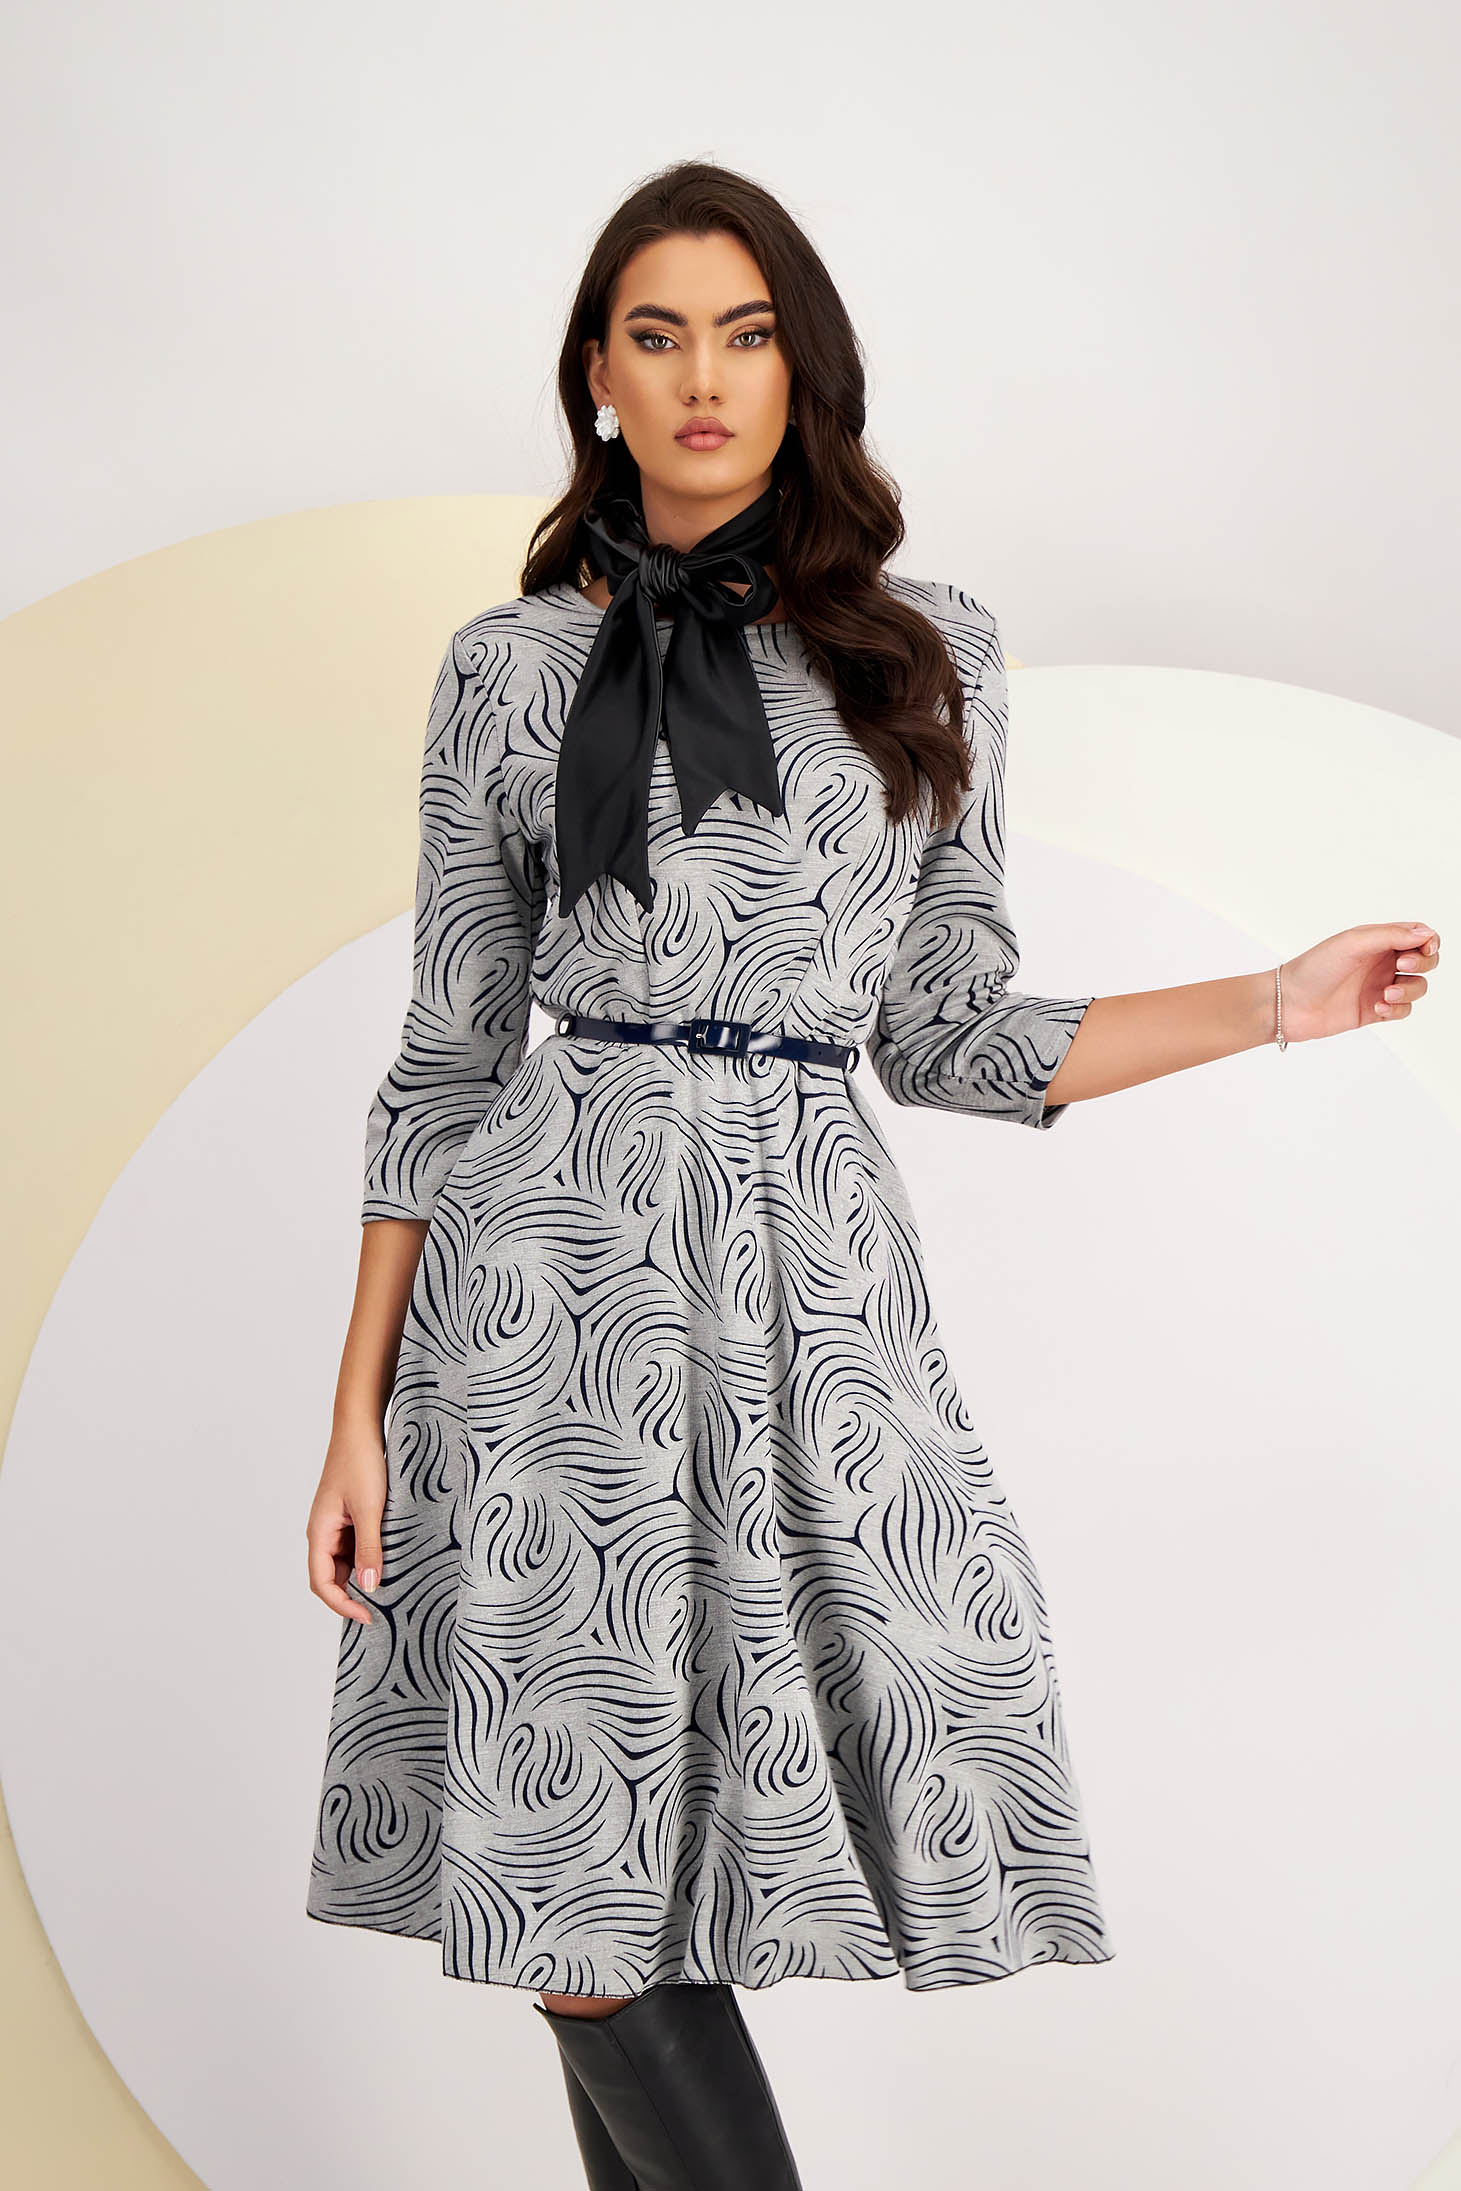 Midi dress made of thin knitwear in a flared cut with elastic waistband and belt-type accessory - Lady Pandora